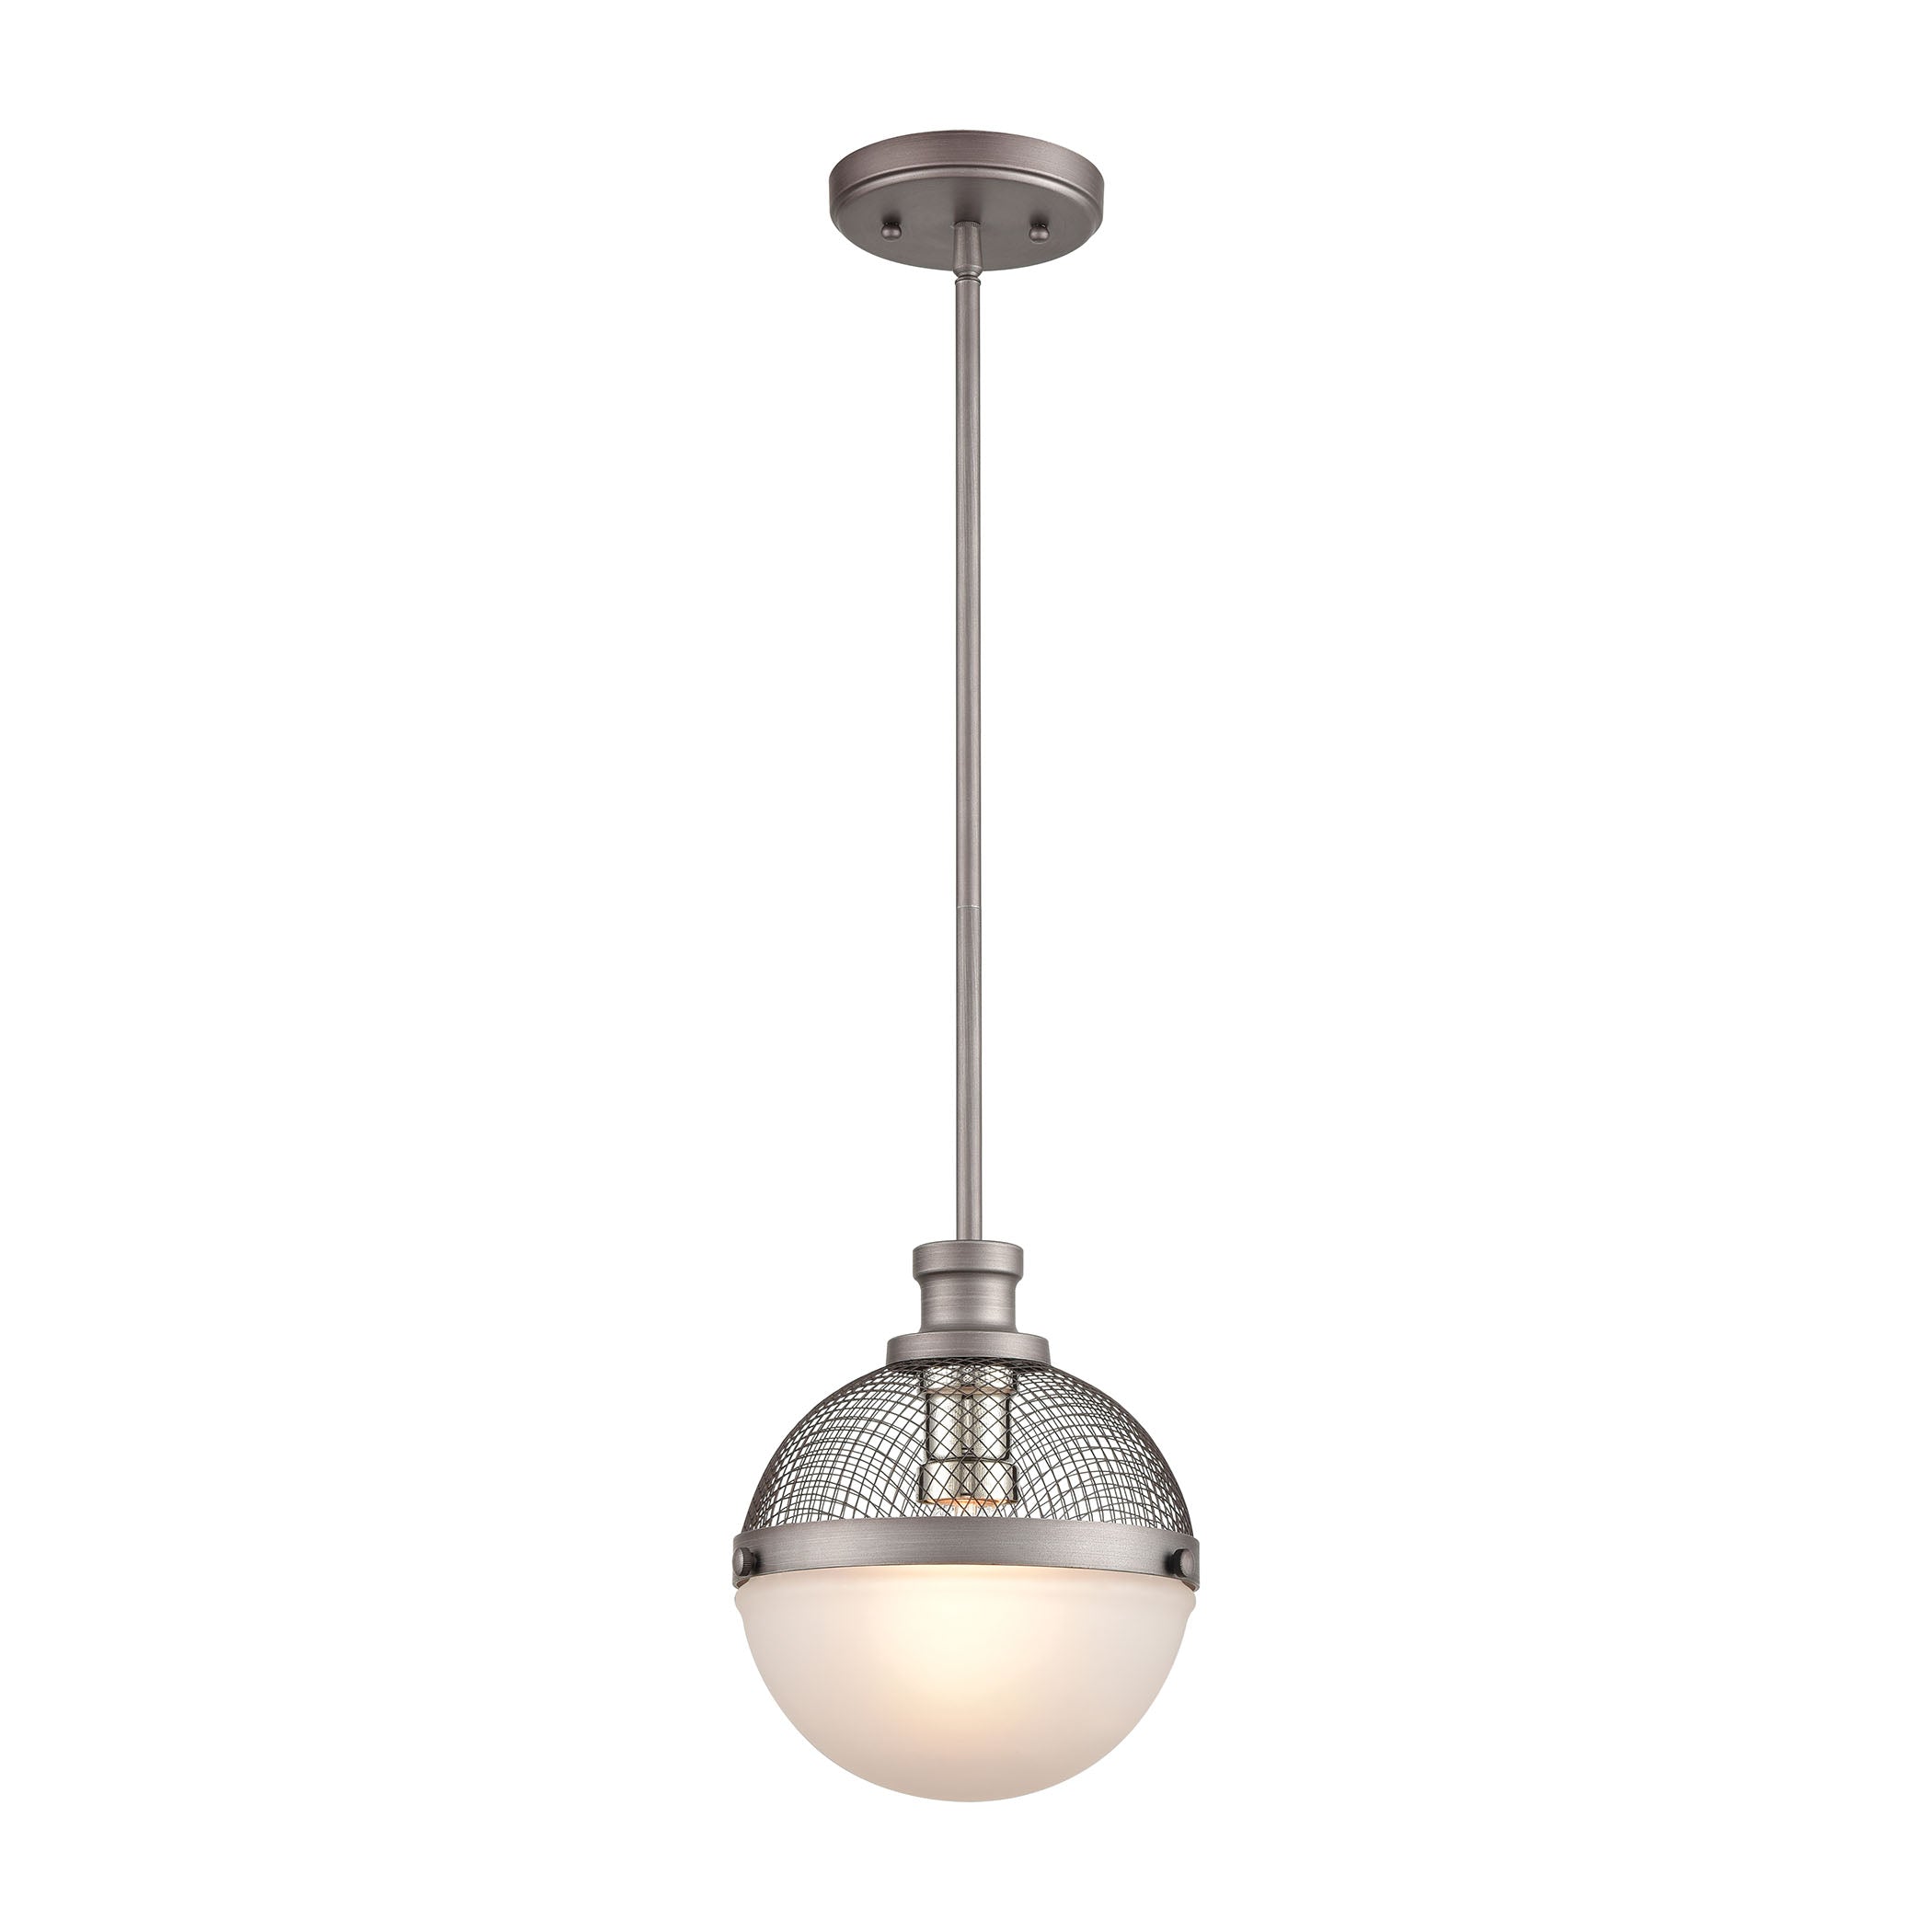 ELK Lighting 15555/1 Calabria 1-Light Mini Pendant in Weathered Zinc and Polished Nickel with Frosted Glass